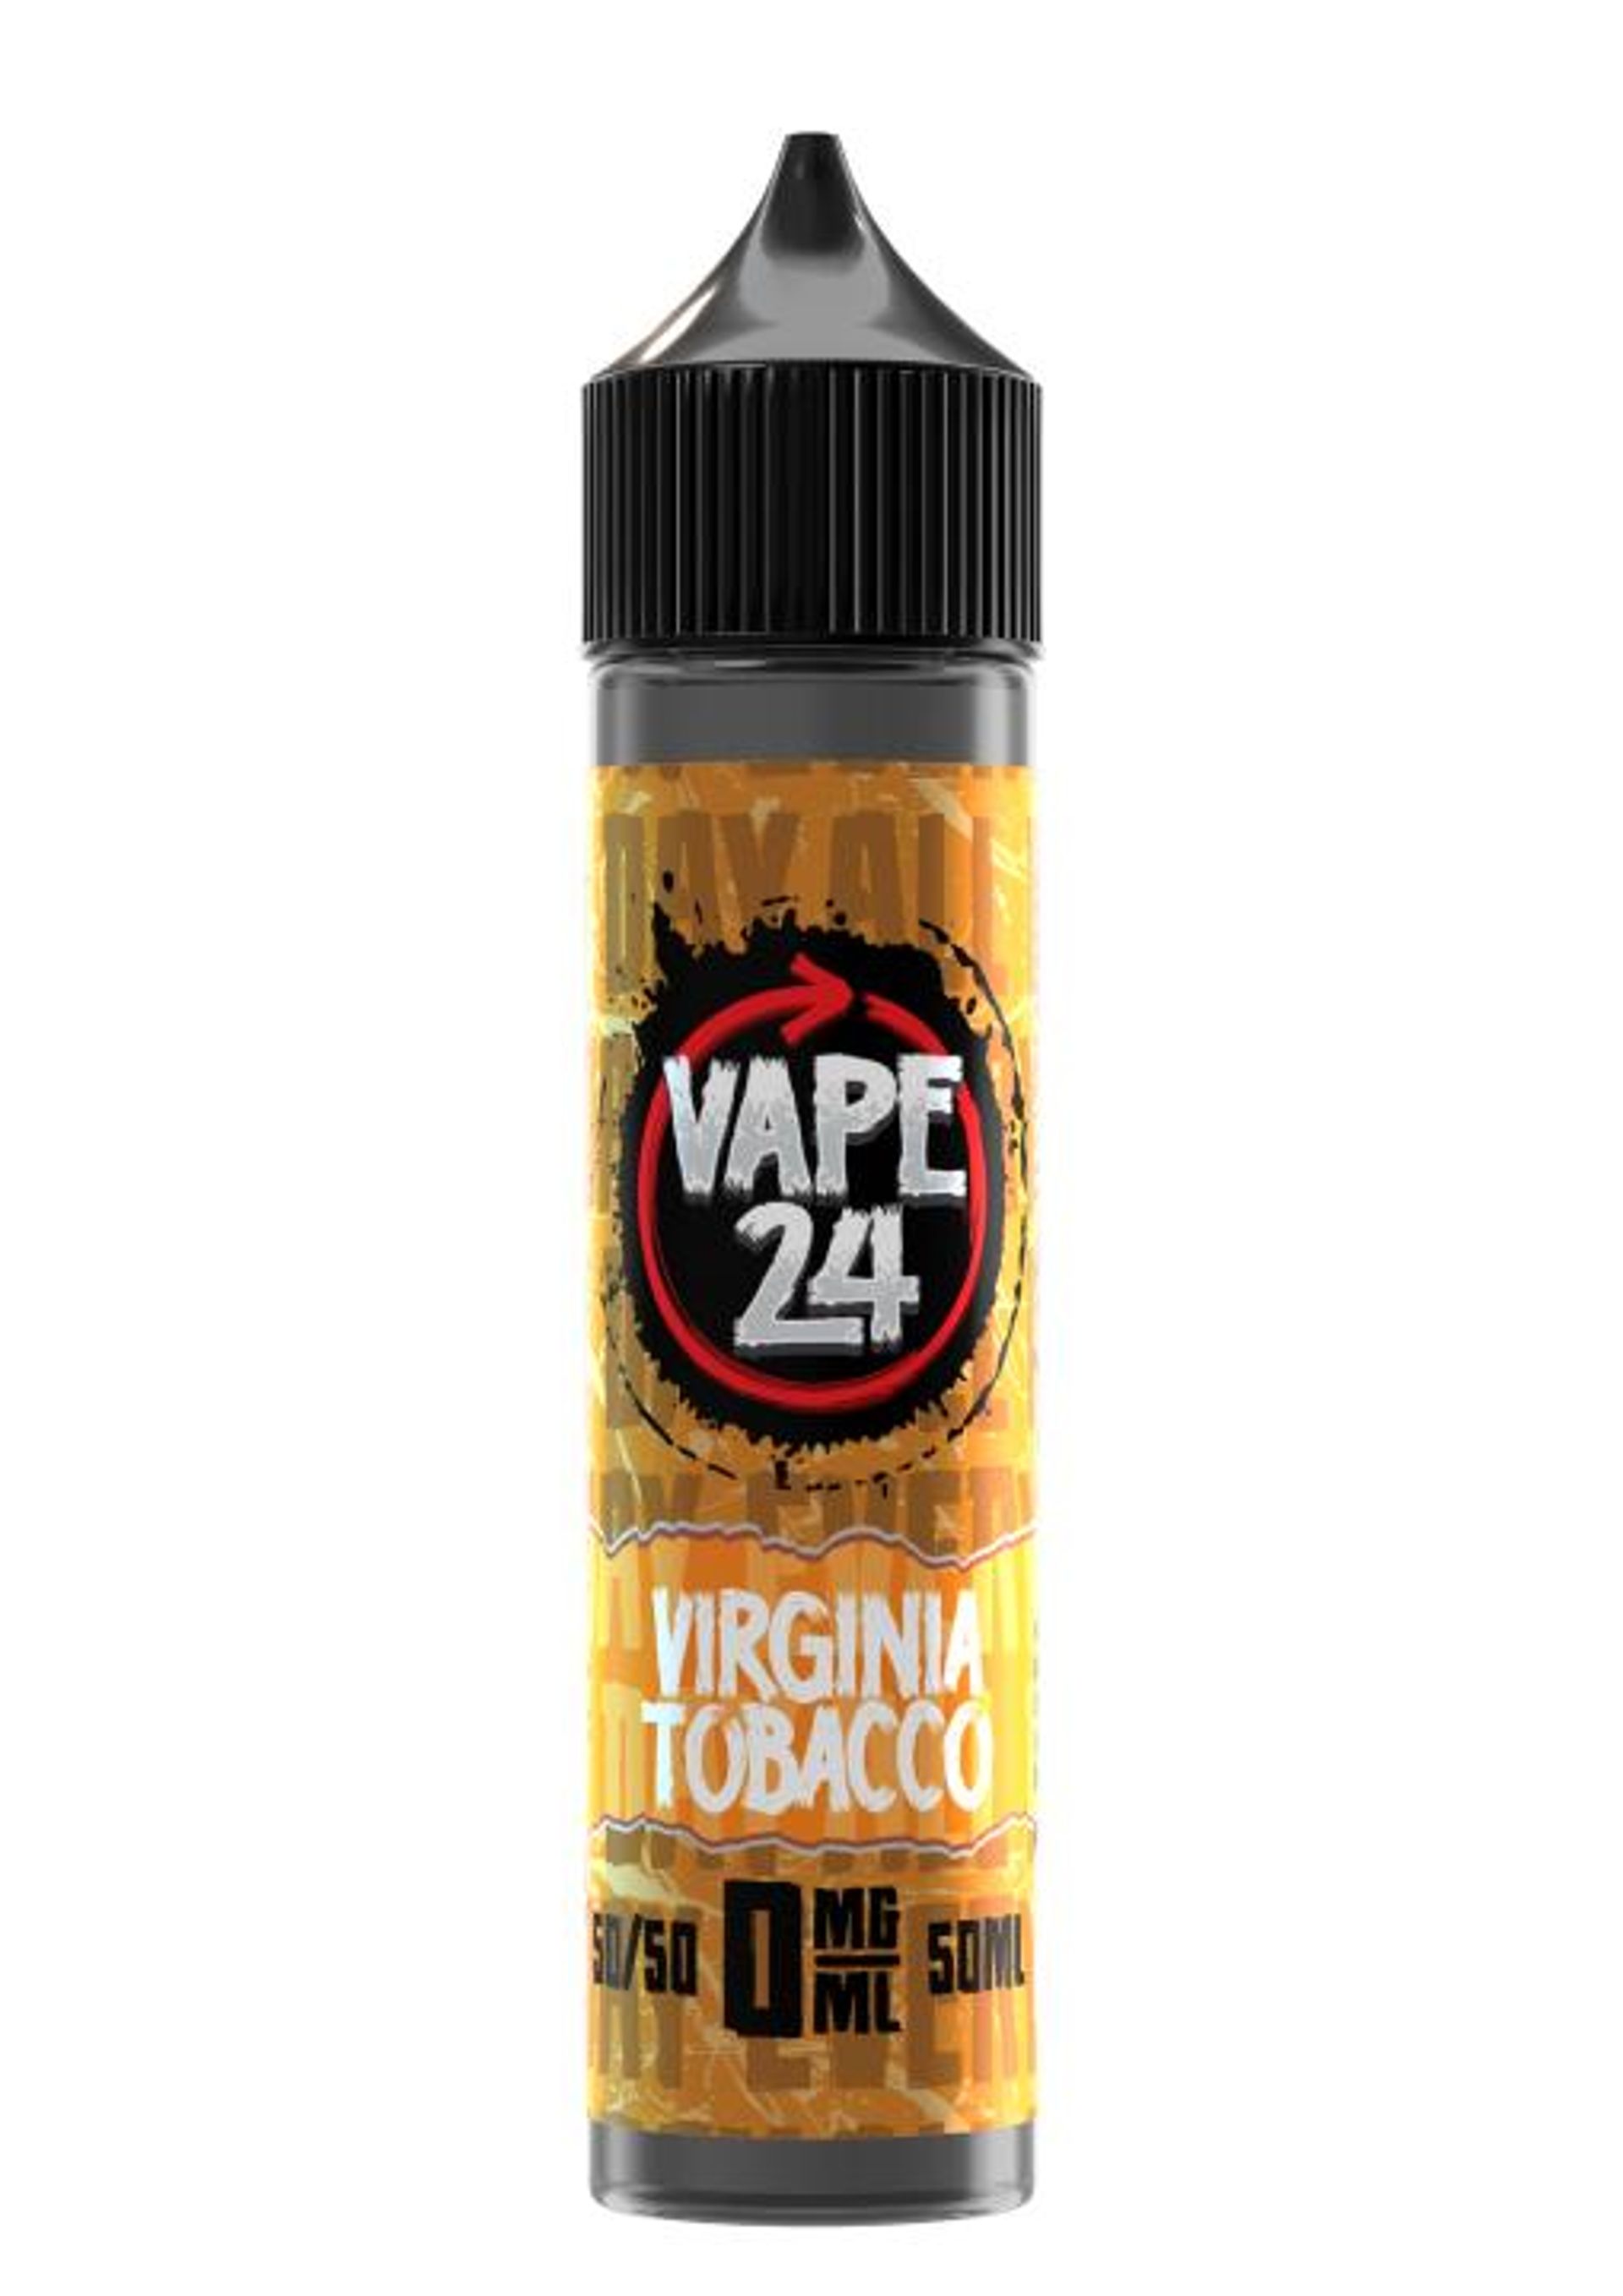 Image of Virginia Tobacco by Vape 24